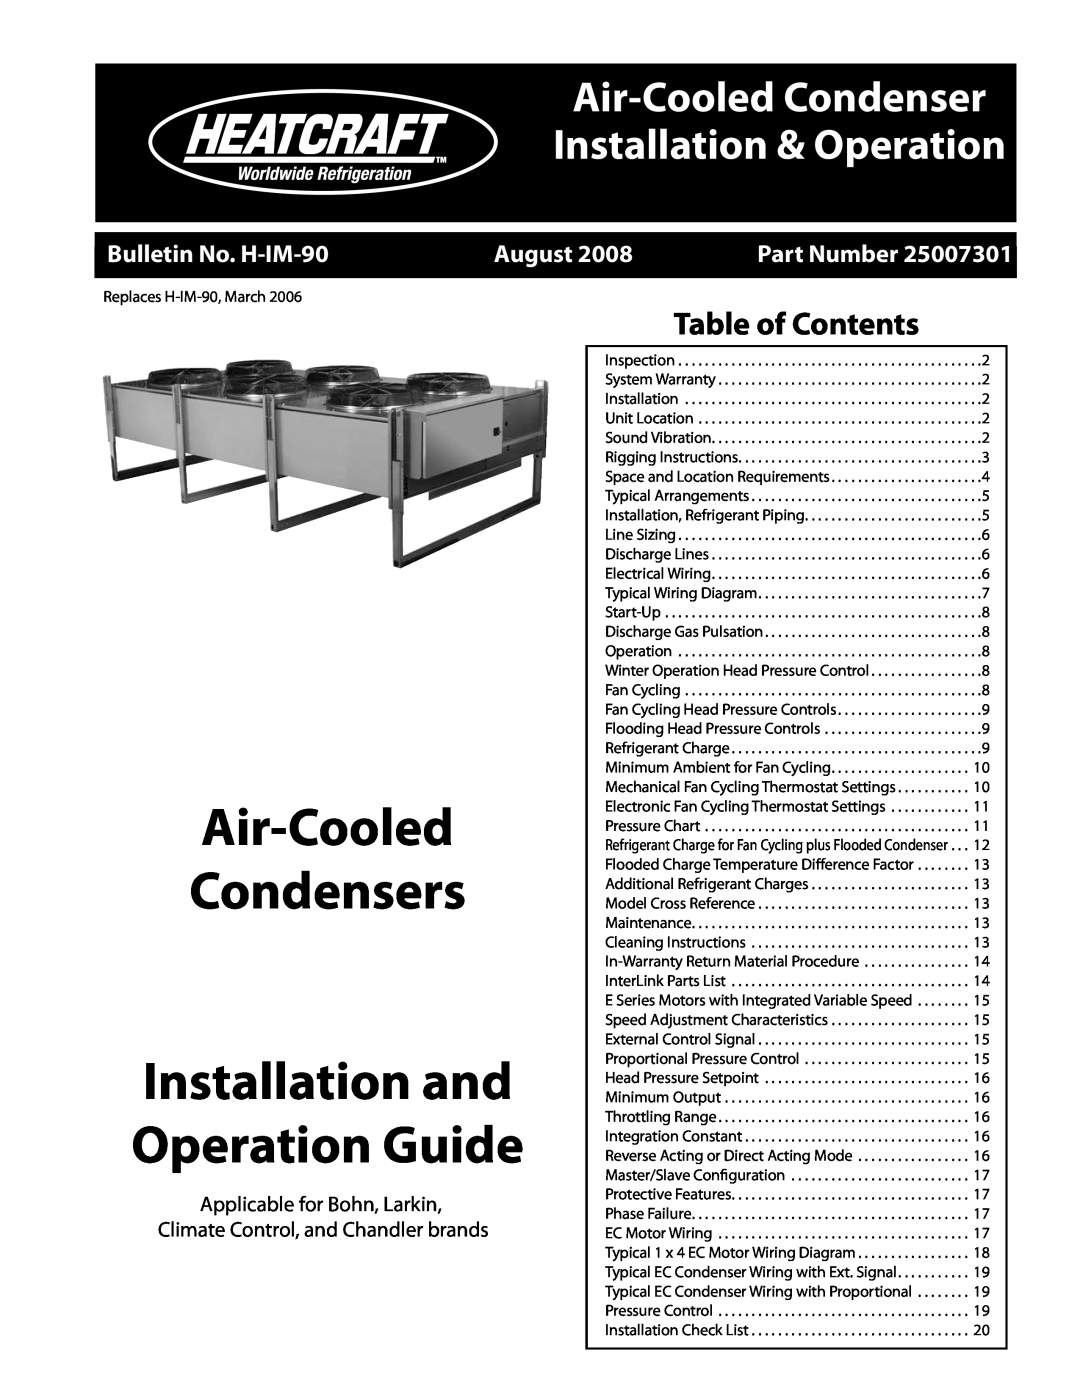 Heatcraft Refrigeration Products none installation and operation guide Table of Contents, Operation Guide, August 